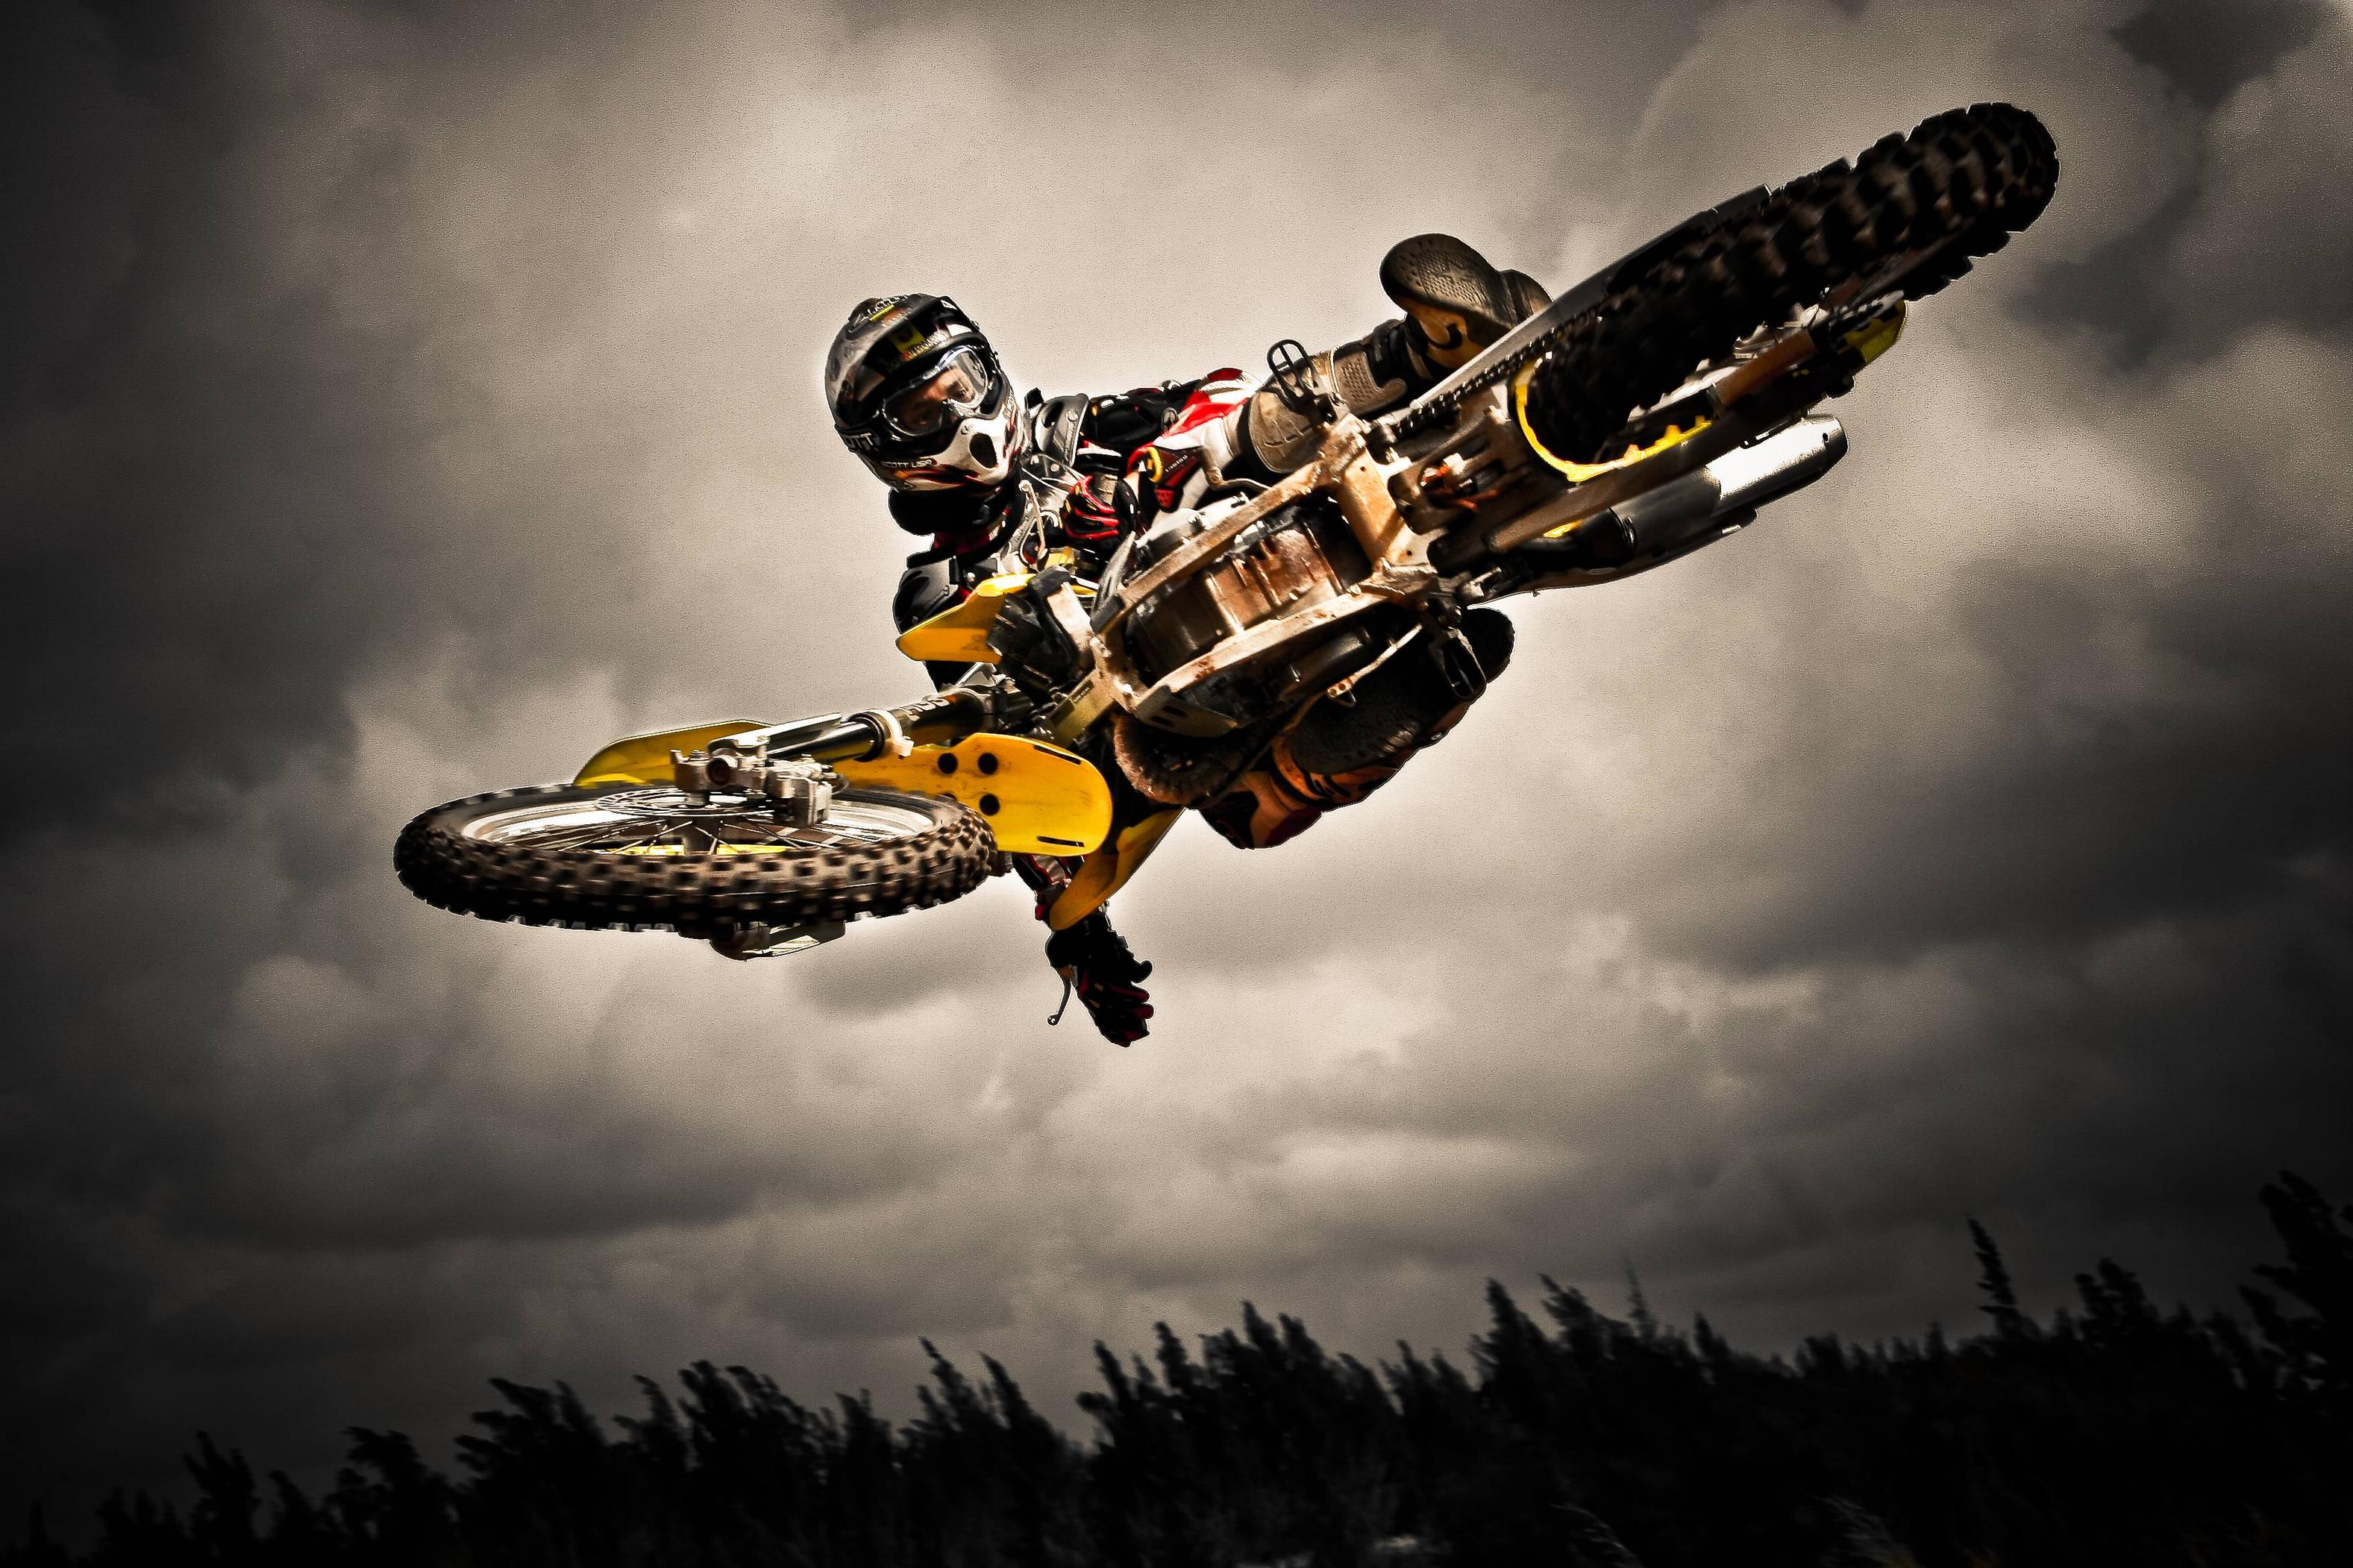 Motocross Wallpaper hd wallpapers ›› Page 3 | ForWallpapers.com